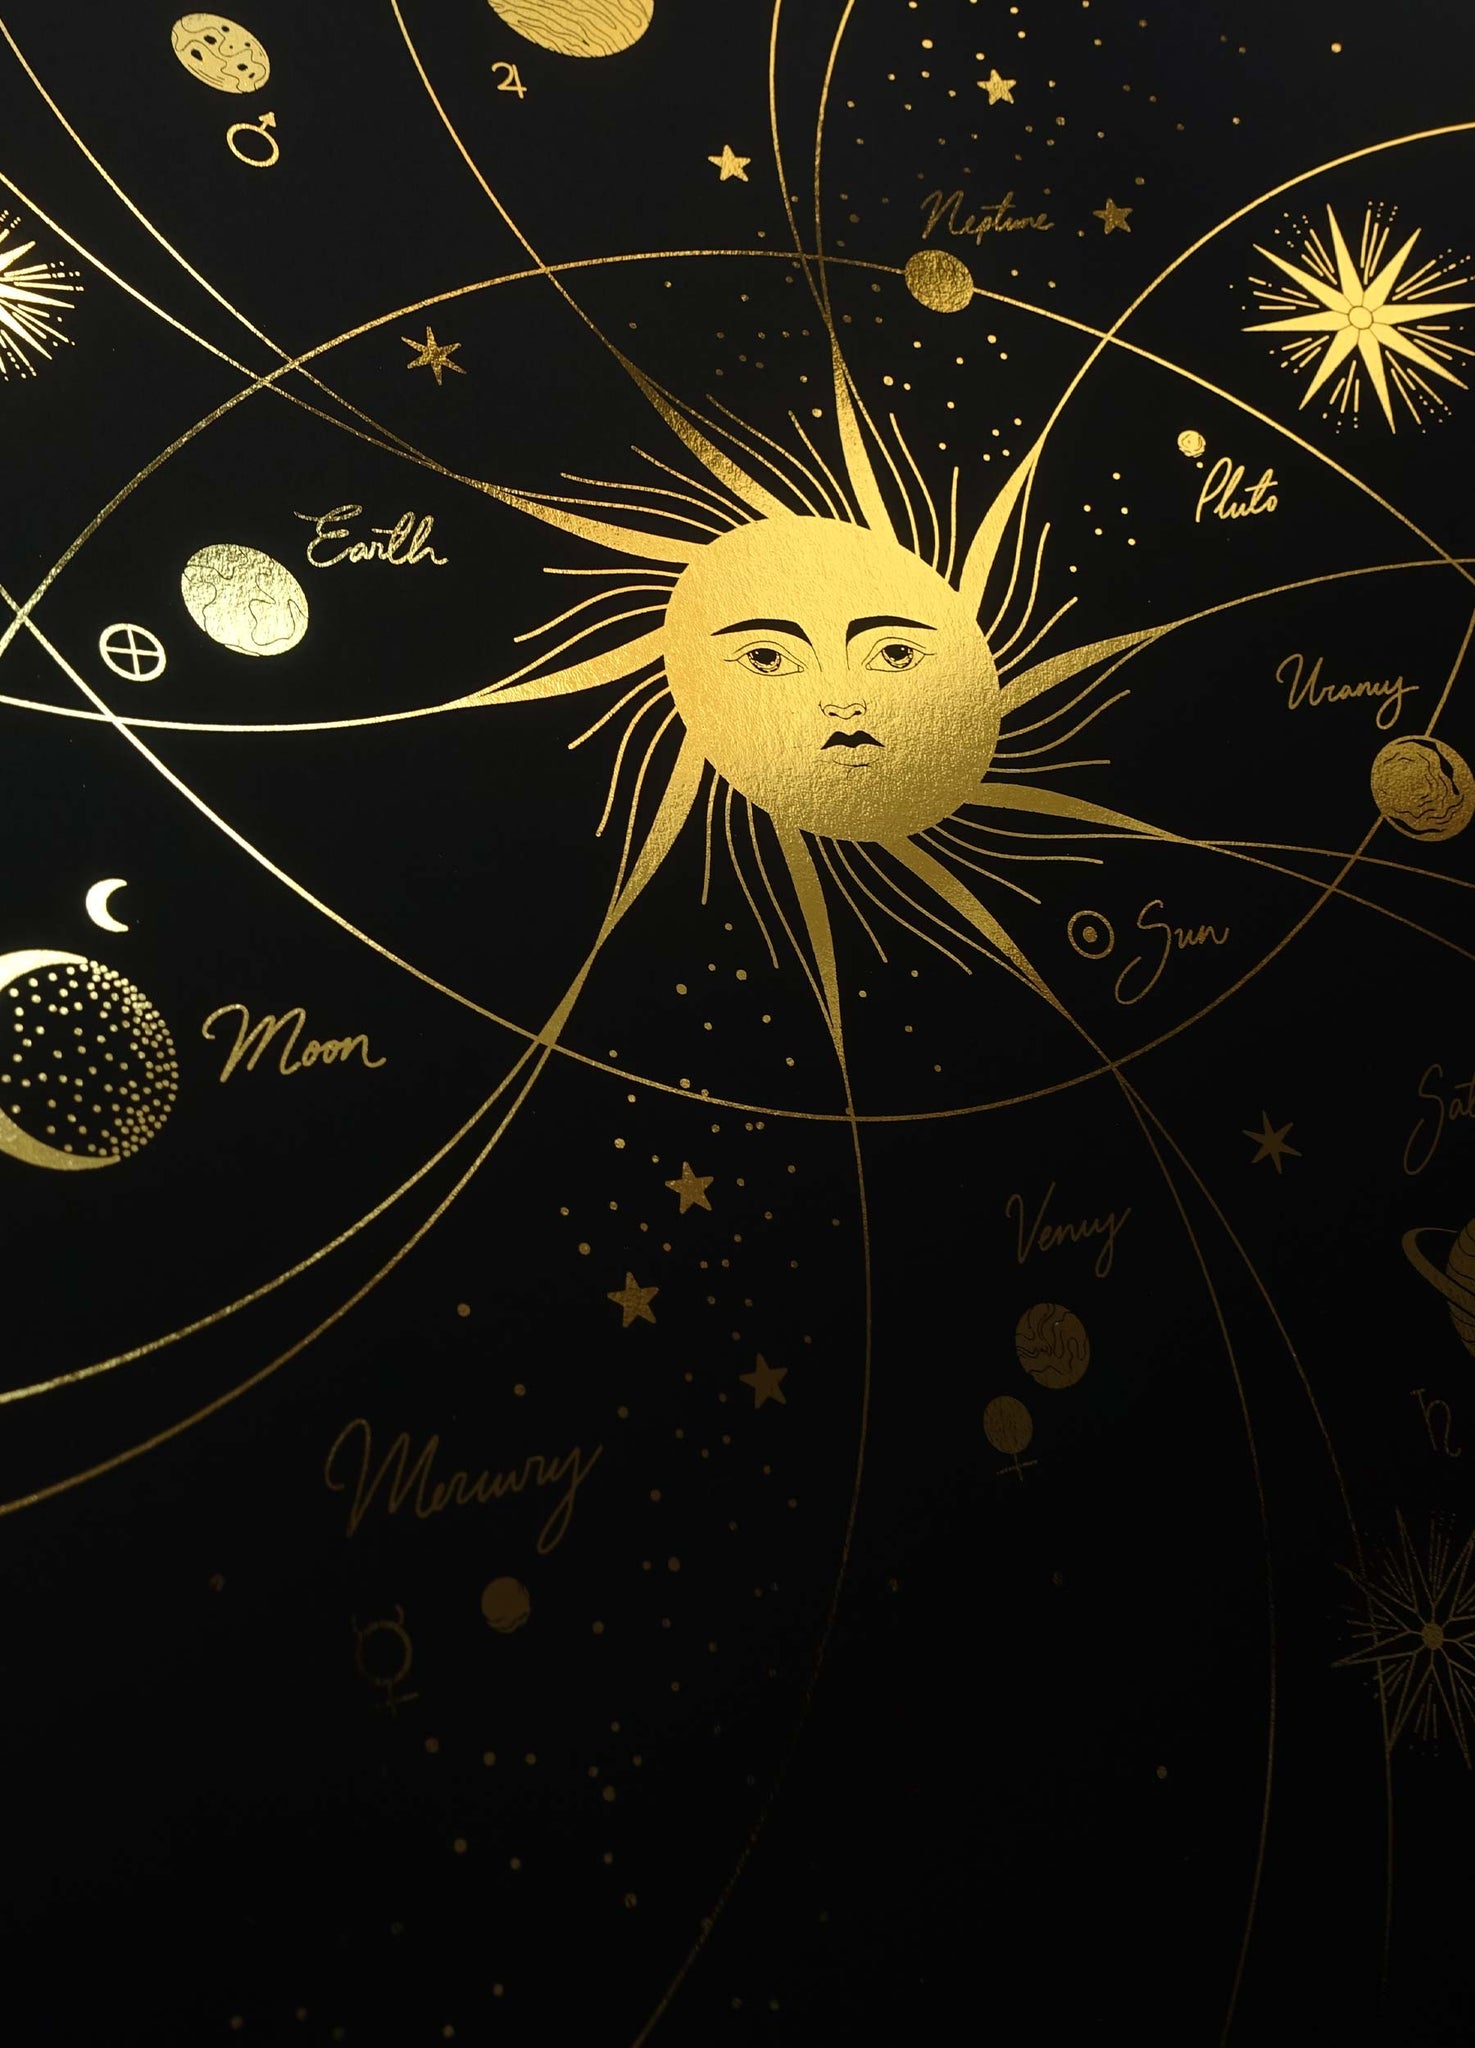 Solar System gold foil art print on black paper by Cocorrina & Co